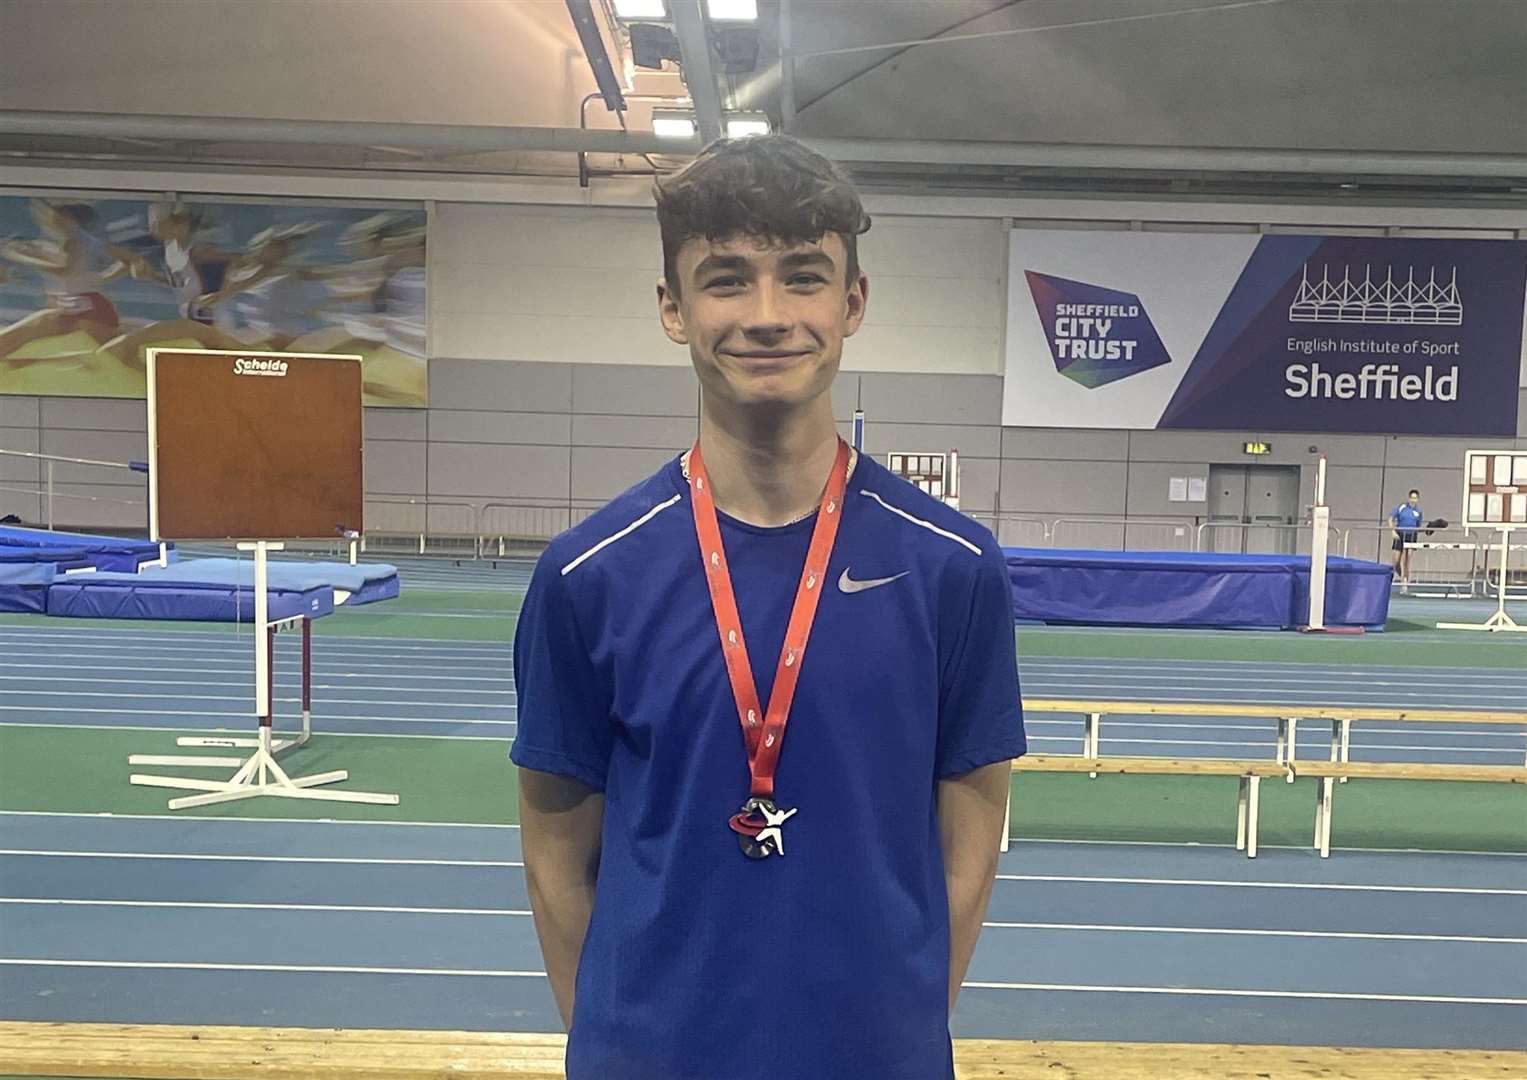 Invicta East Kent's Olly Downs came second at the England Athletics under-15s pentathlon at the English Institute of Sport Sheffield